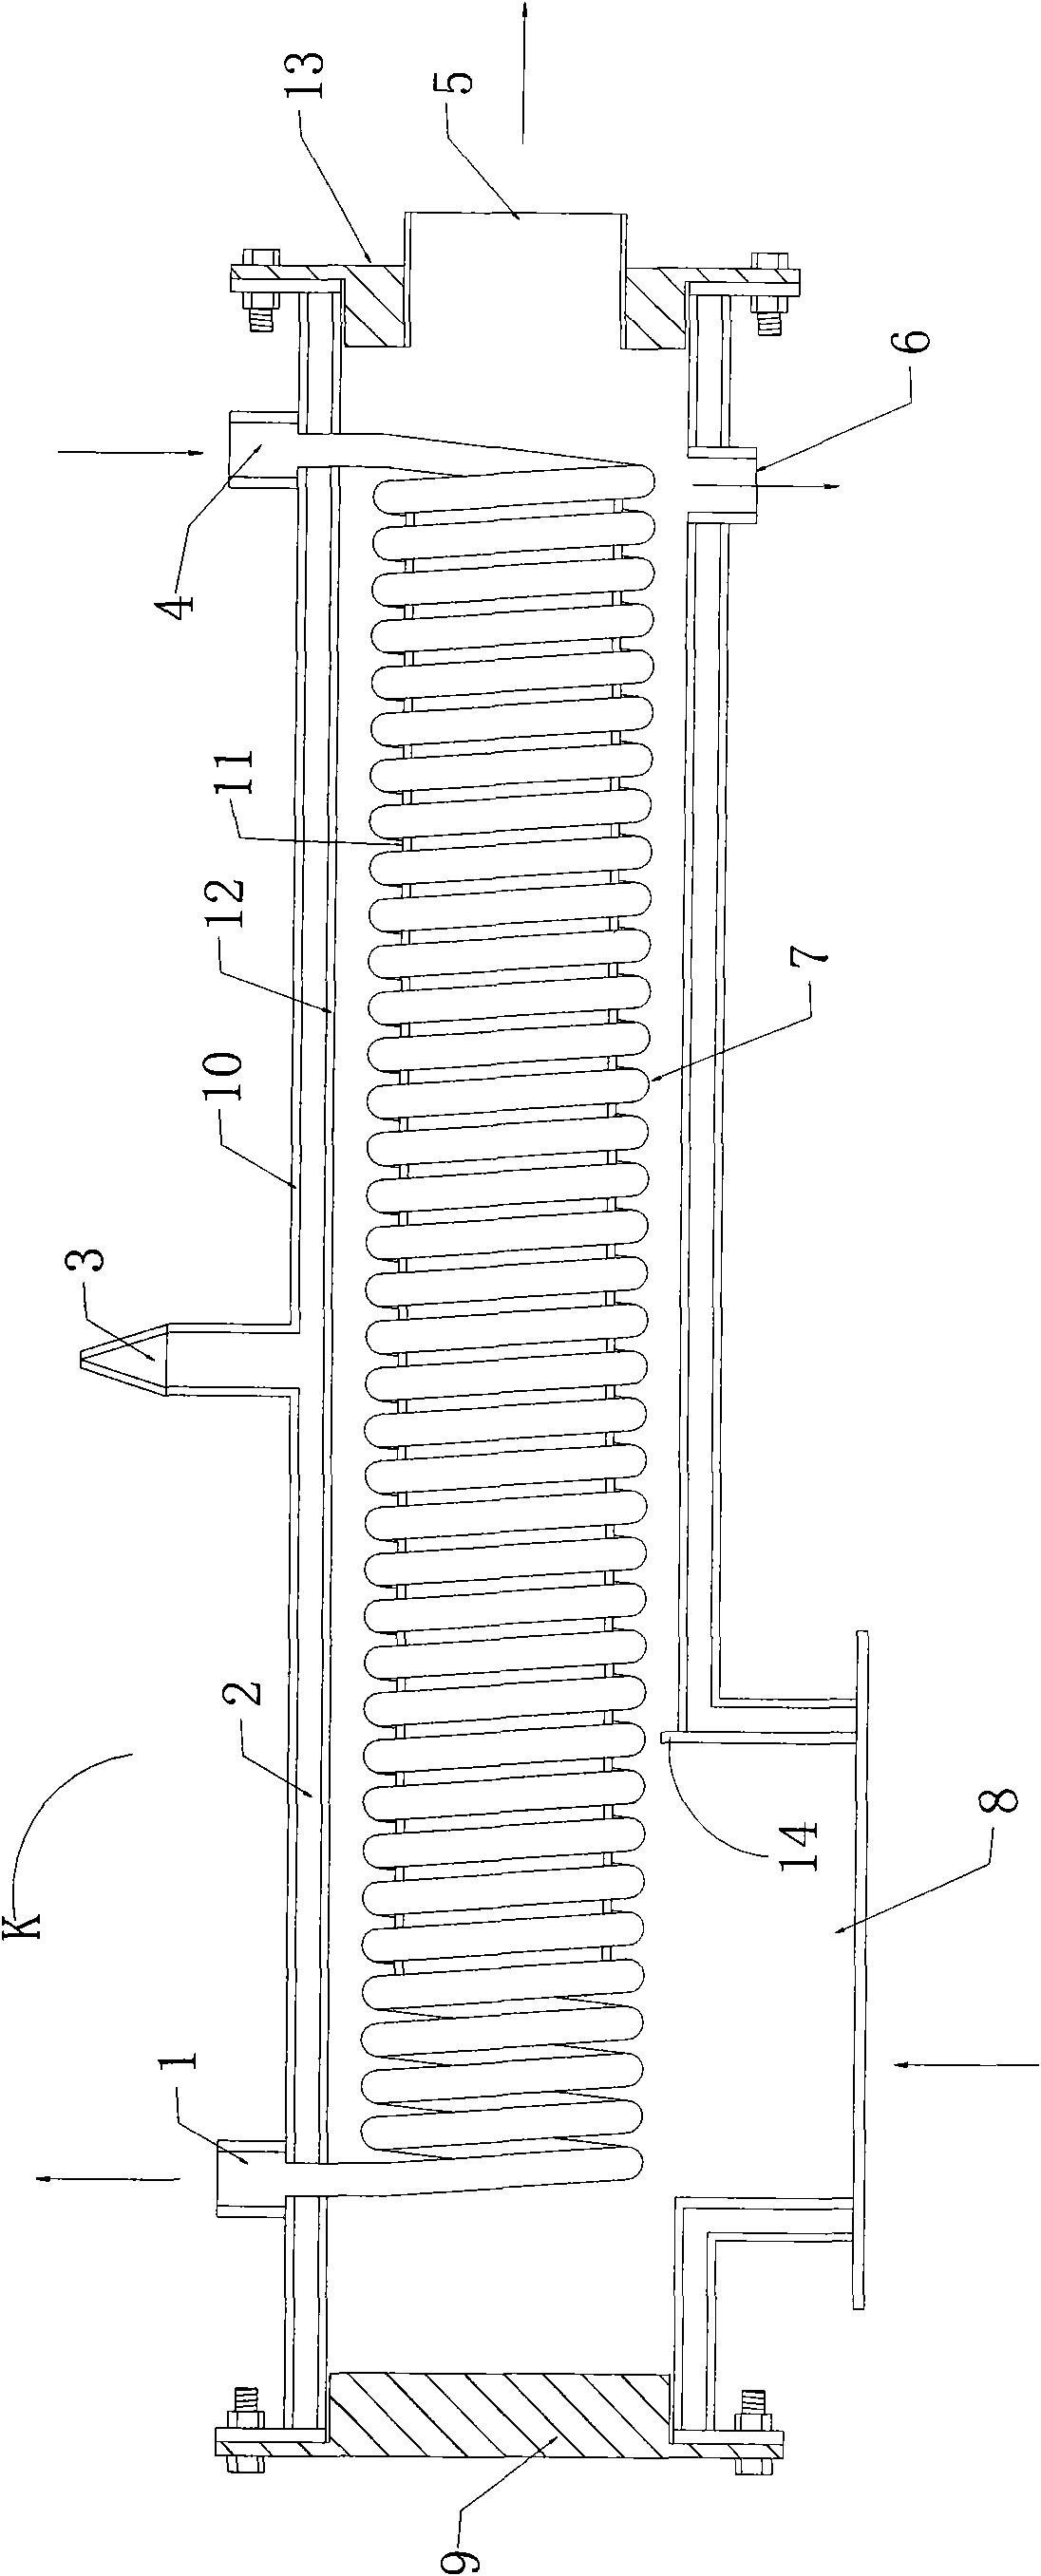 Heat exchange water recoverer for waste steam of steaming cabinet and external connection structure thereof